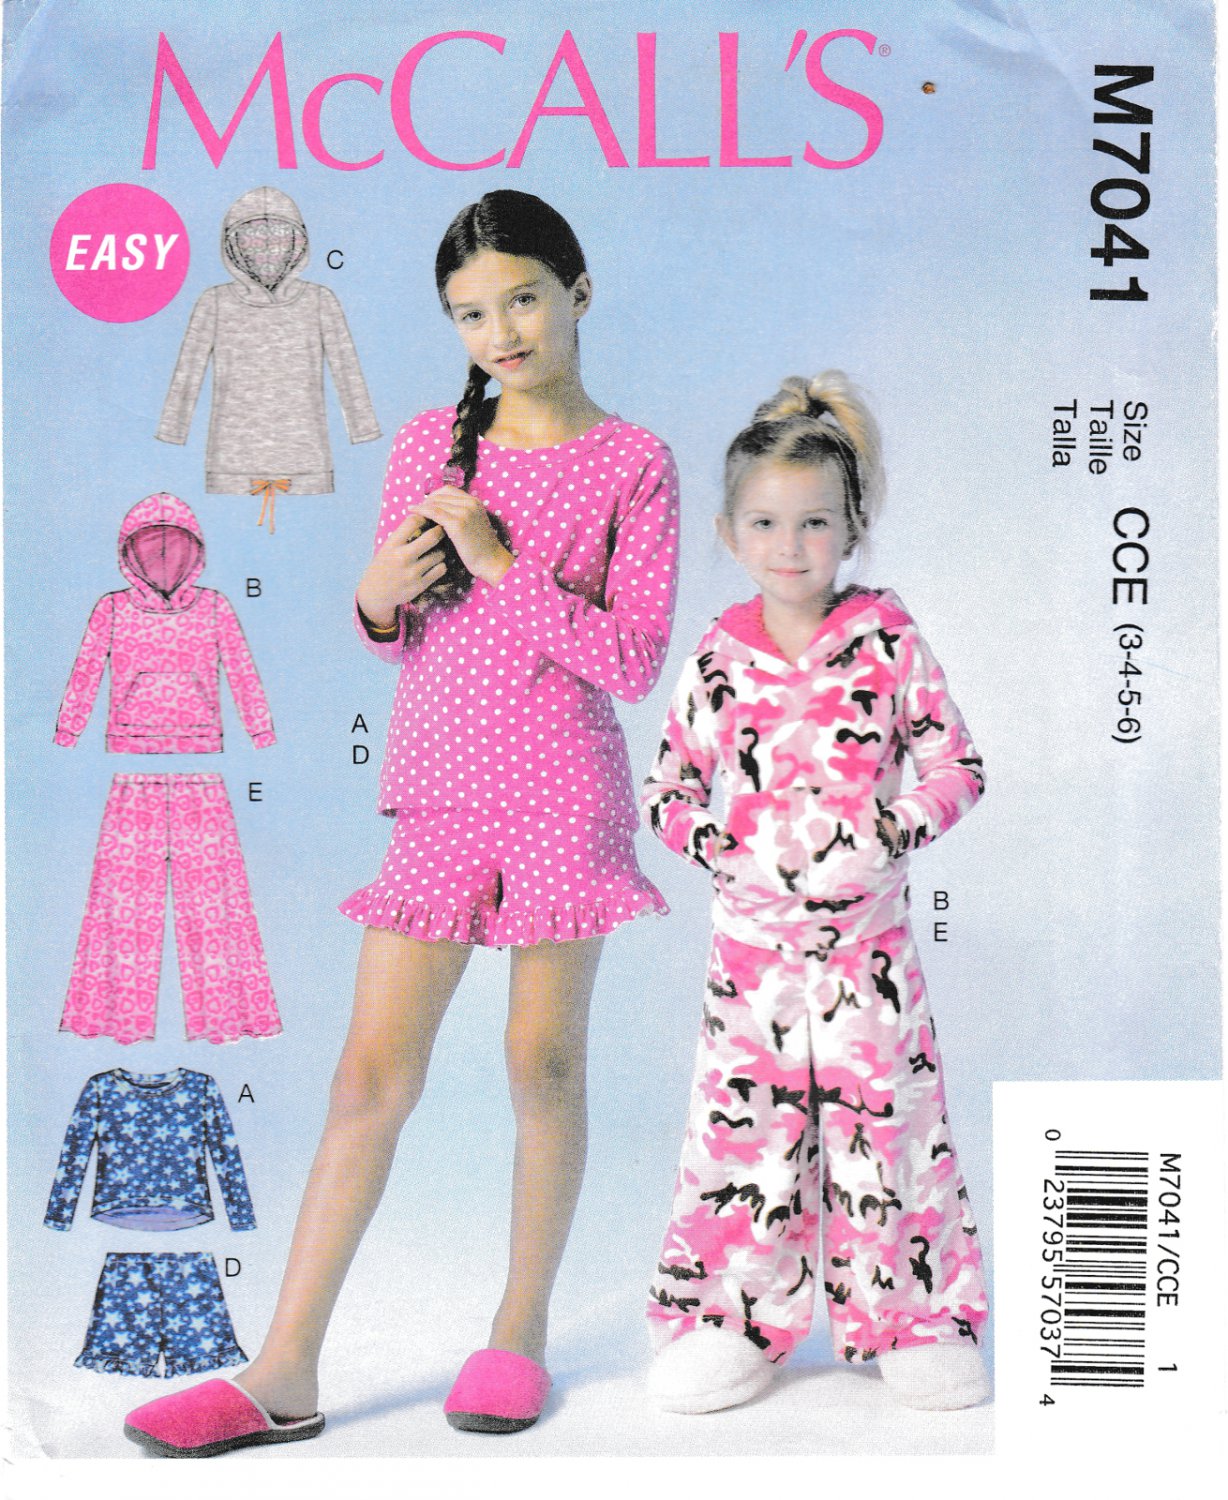 McCall's M7041 7041 Girls Tops Shorts Pants Pajamas Easy Sewing Pattern Childrens Sizes 3-4-5-6